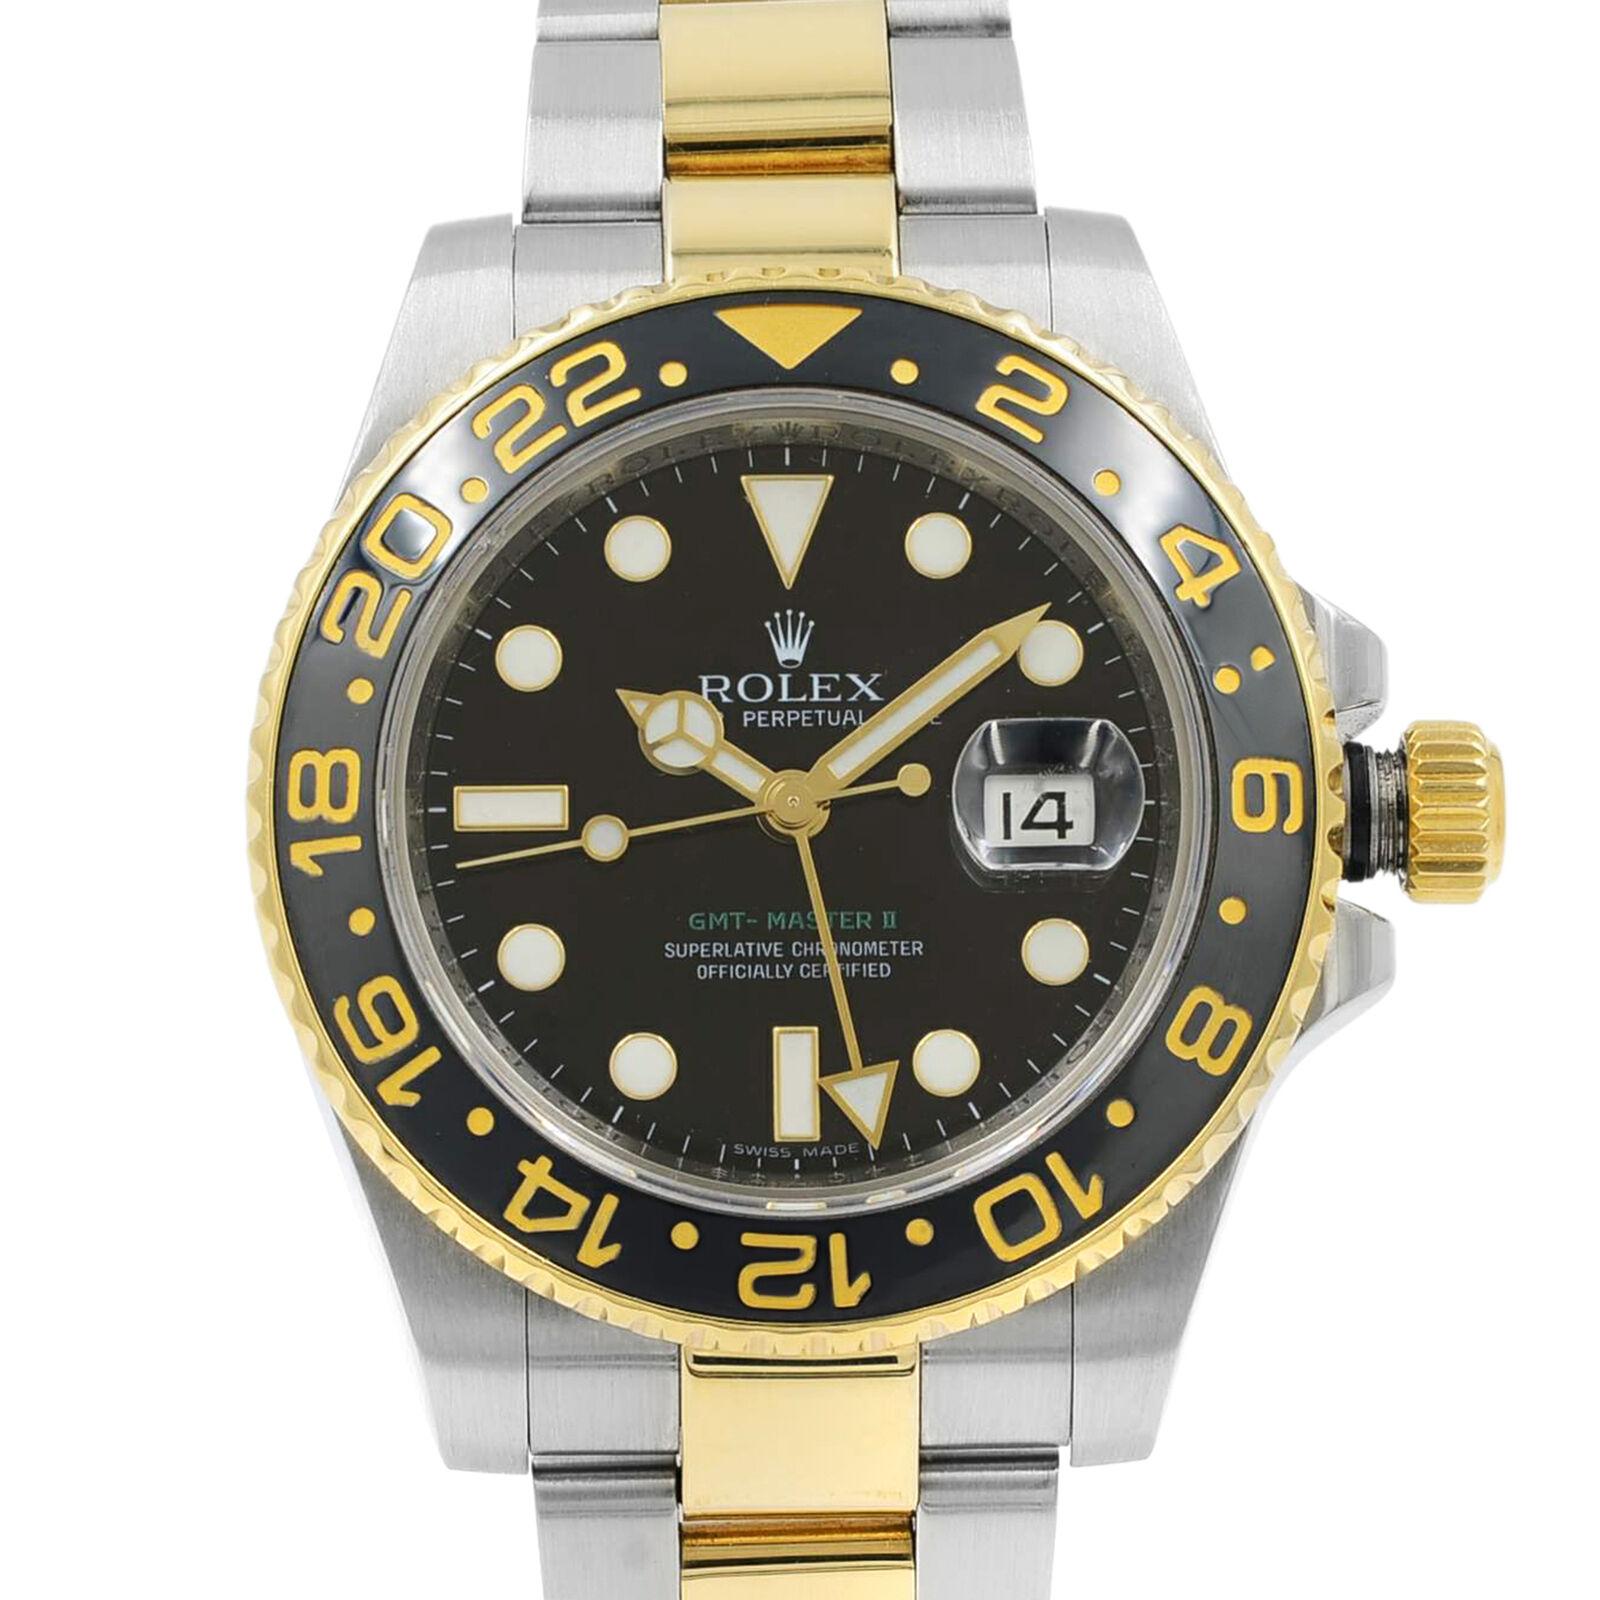 This pre-owned Rolex GMT-Master II 116713 is a beautiful men's timepiece that is powered by an automatic movement which is cased in a stainless steel case. It has a round shape face, date dial and has hand sticks & dots style markers. It is